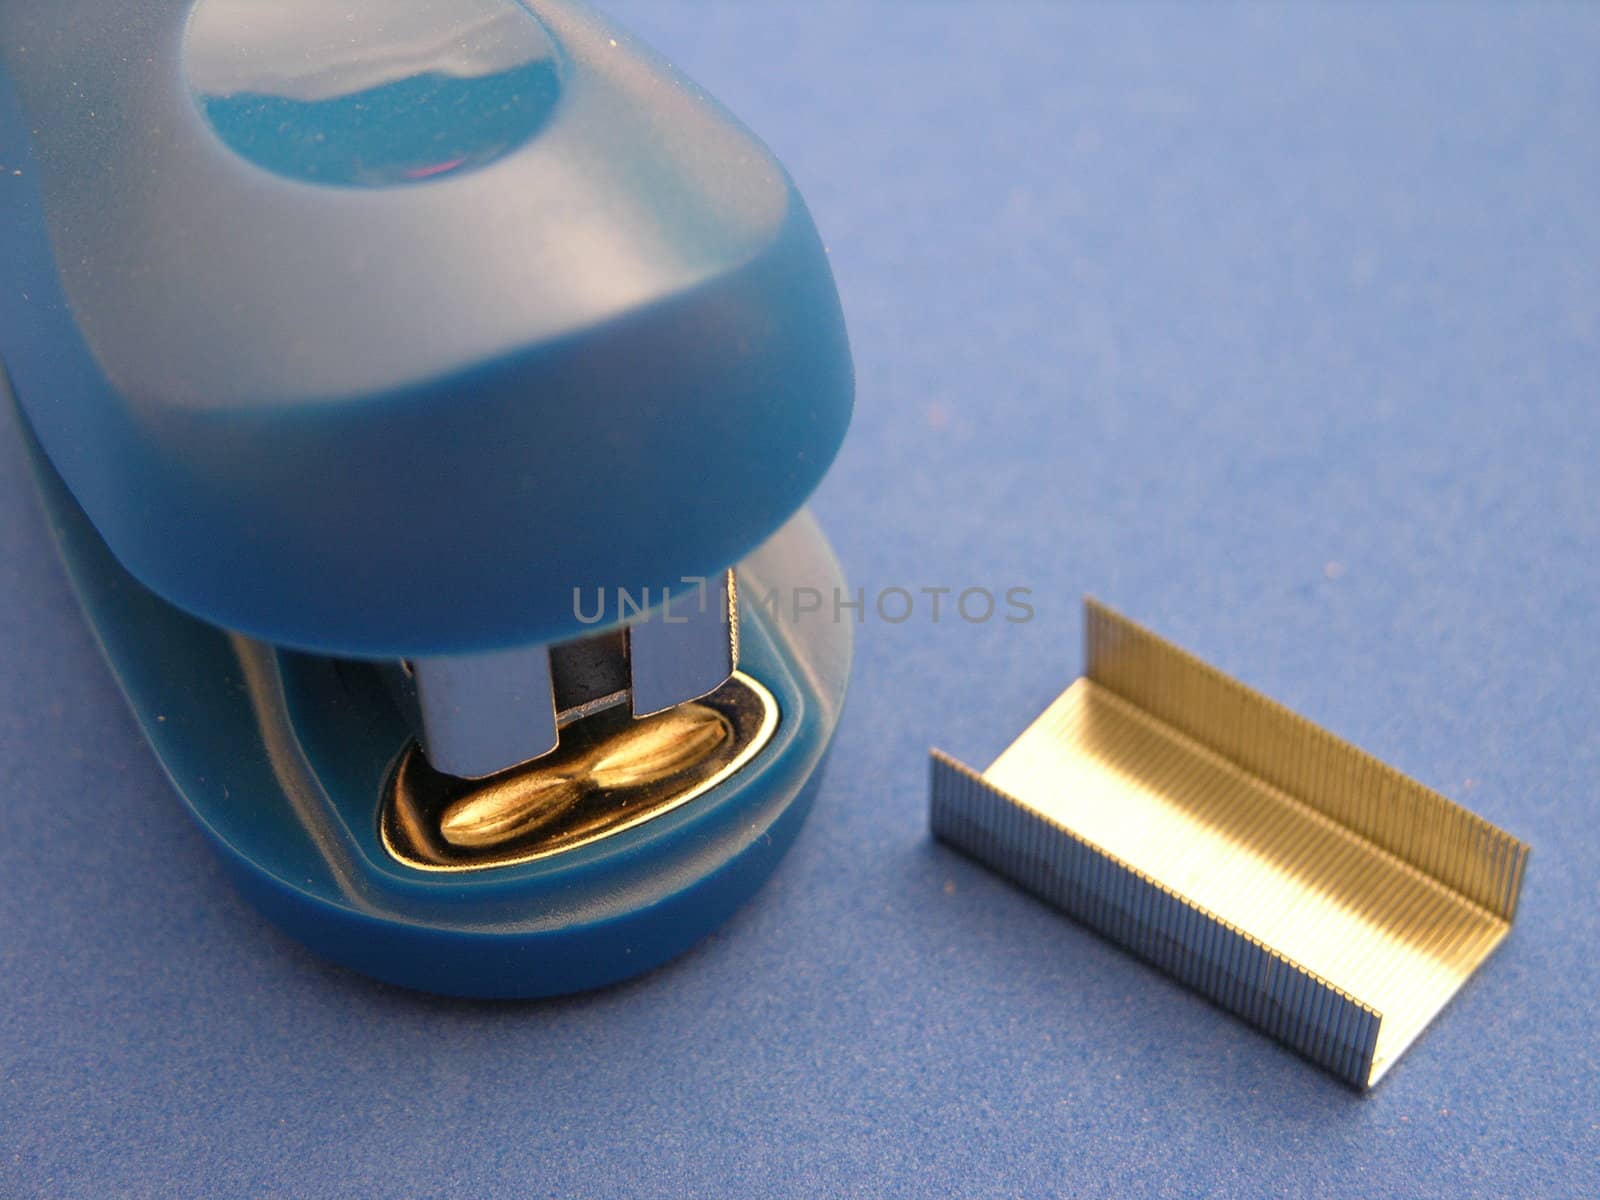 A closeup view of a small stapler on a blue background